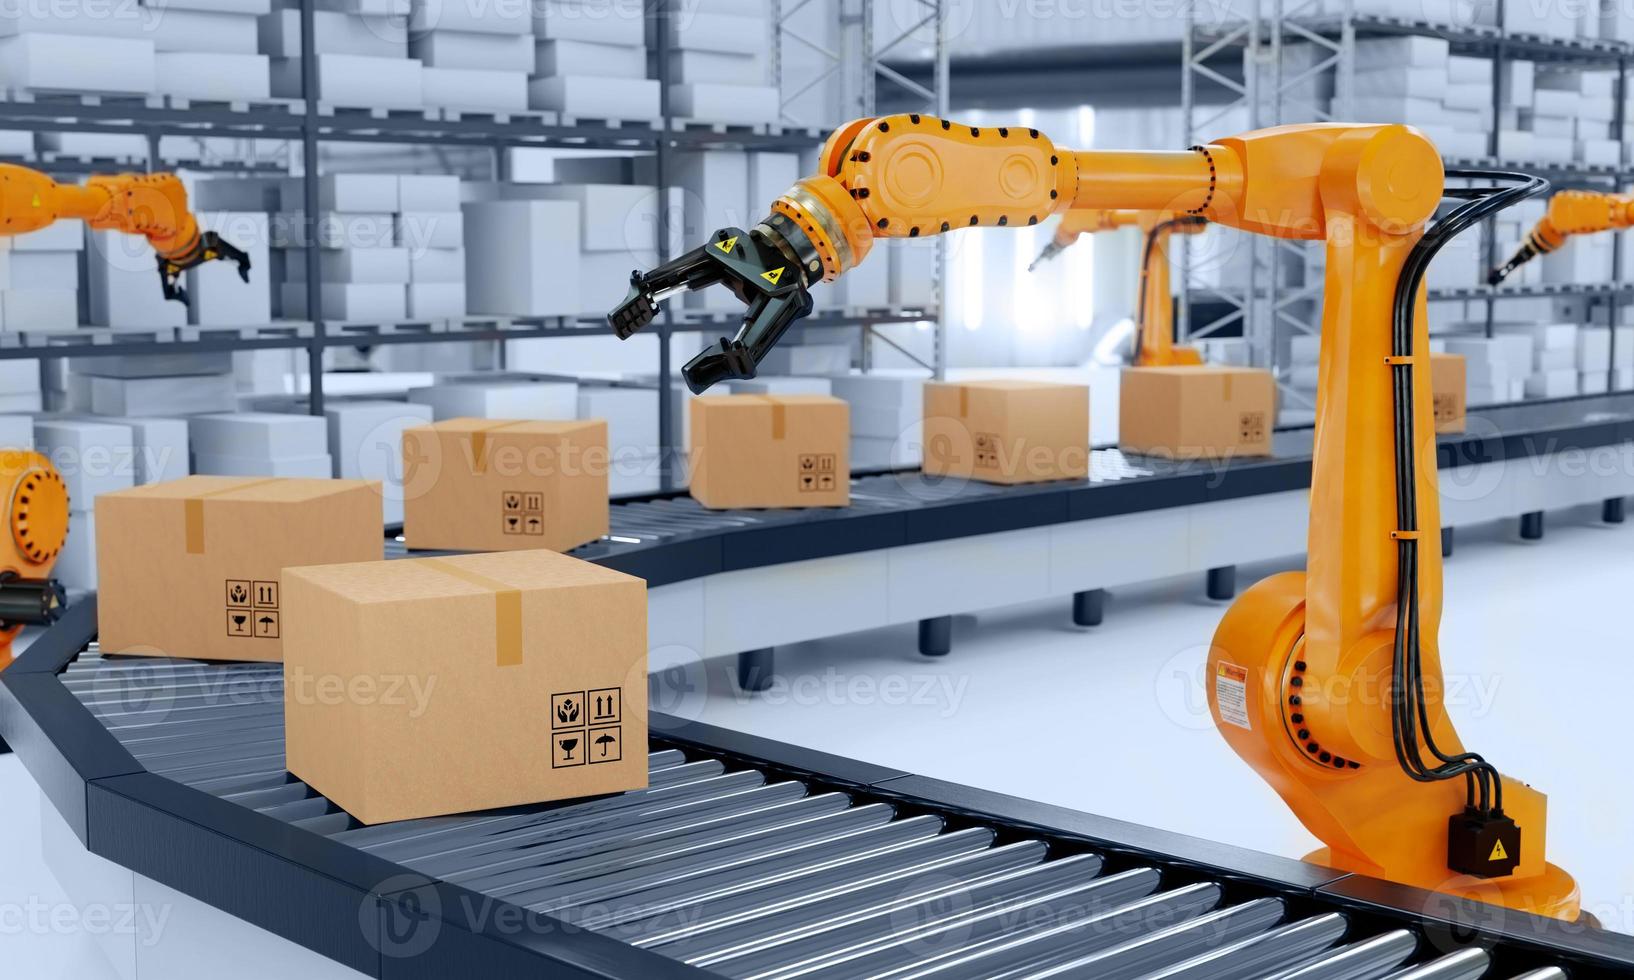 Industrial robot arm grabbing the cardboard box on roller conveyor rack with storage warehouse background. Technology and artificial intelligence innovation concept. 3D illustration rendering photo